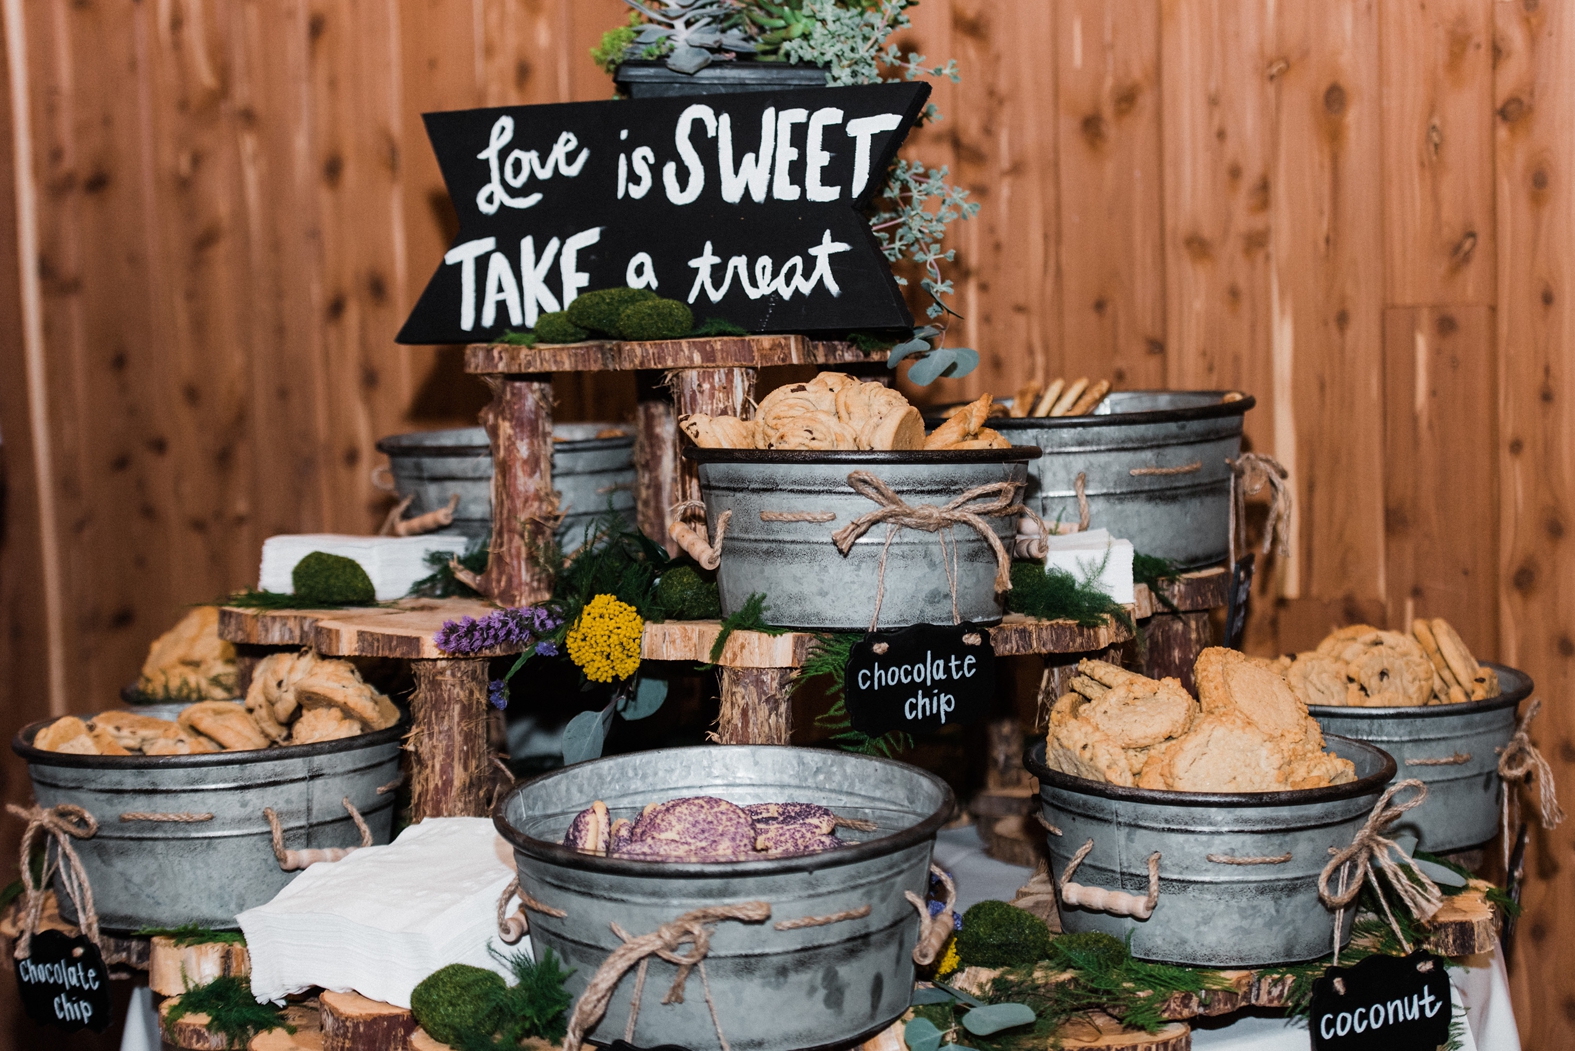 Wedding cookie dessert display in tiered, galvanized metal buckets in the Party Barn at Little Piney Lodge in Hermann, MO